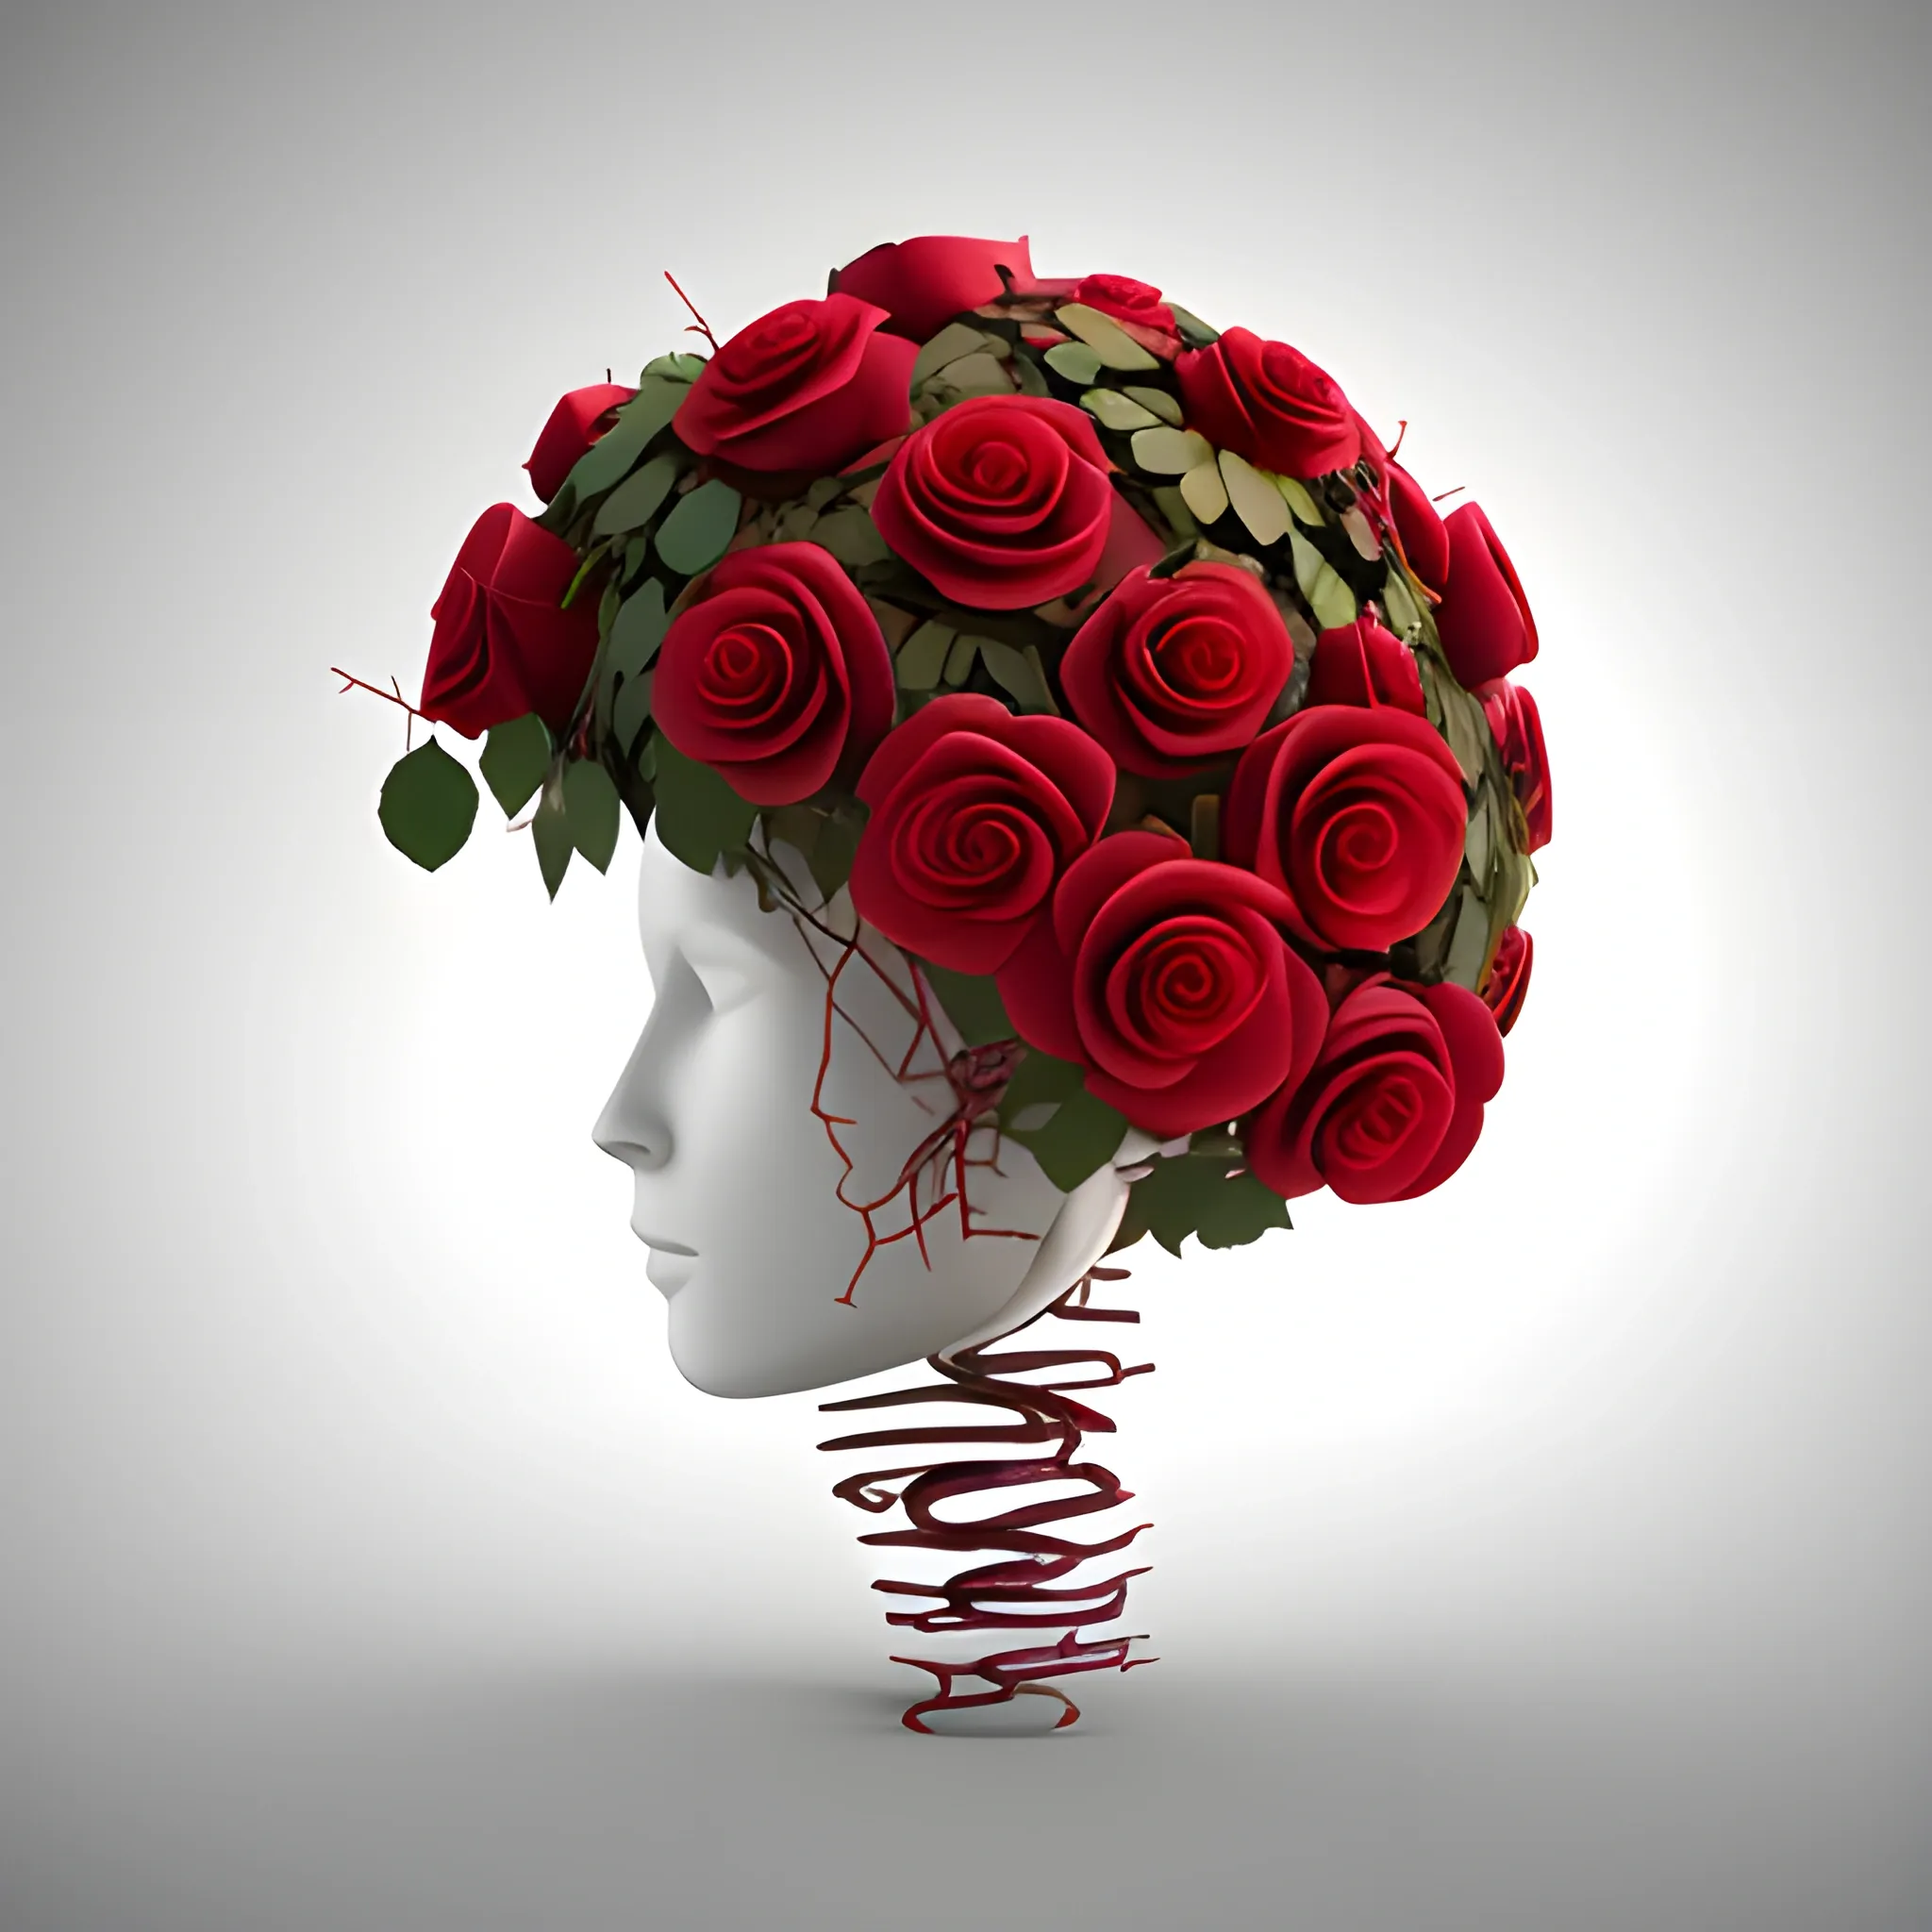 brain only with red roses and brown vines with thorns on them growing out of the brain like a garden, 3D